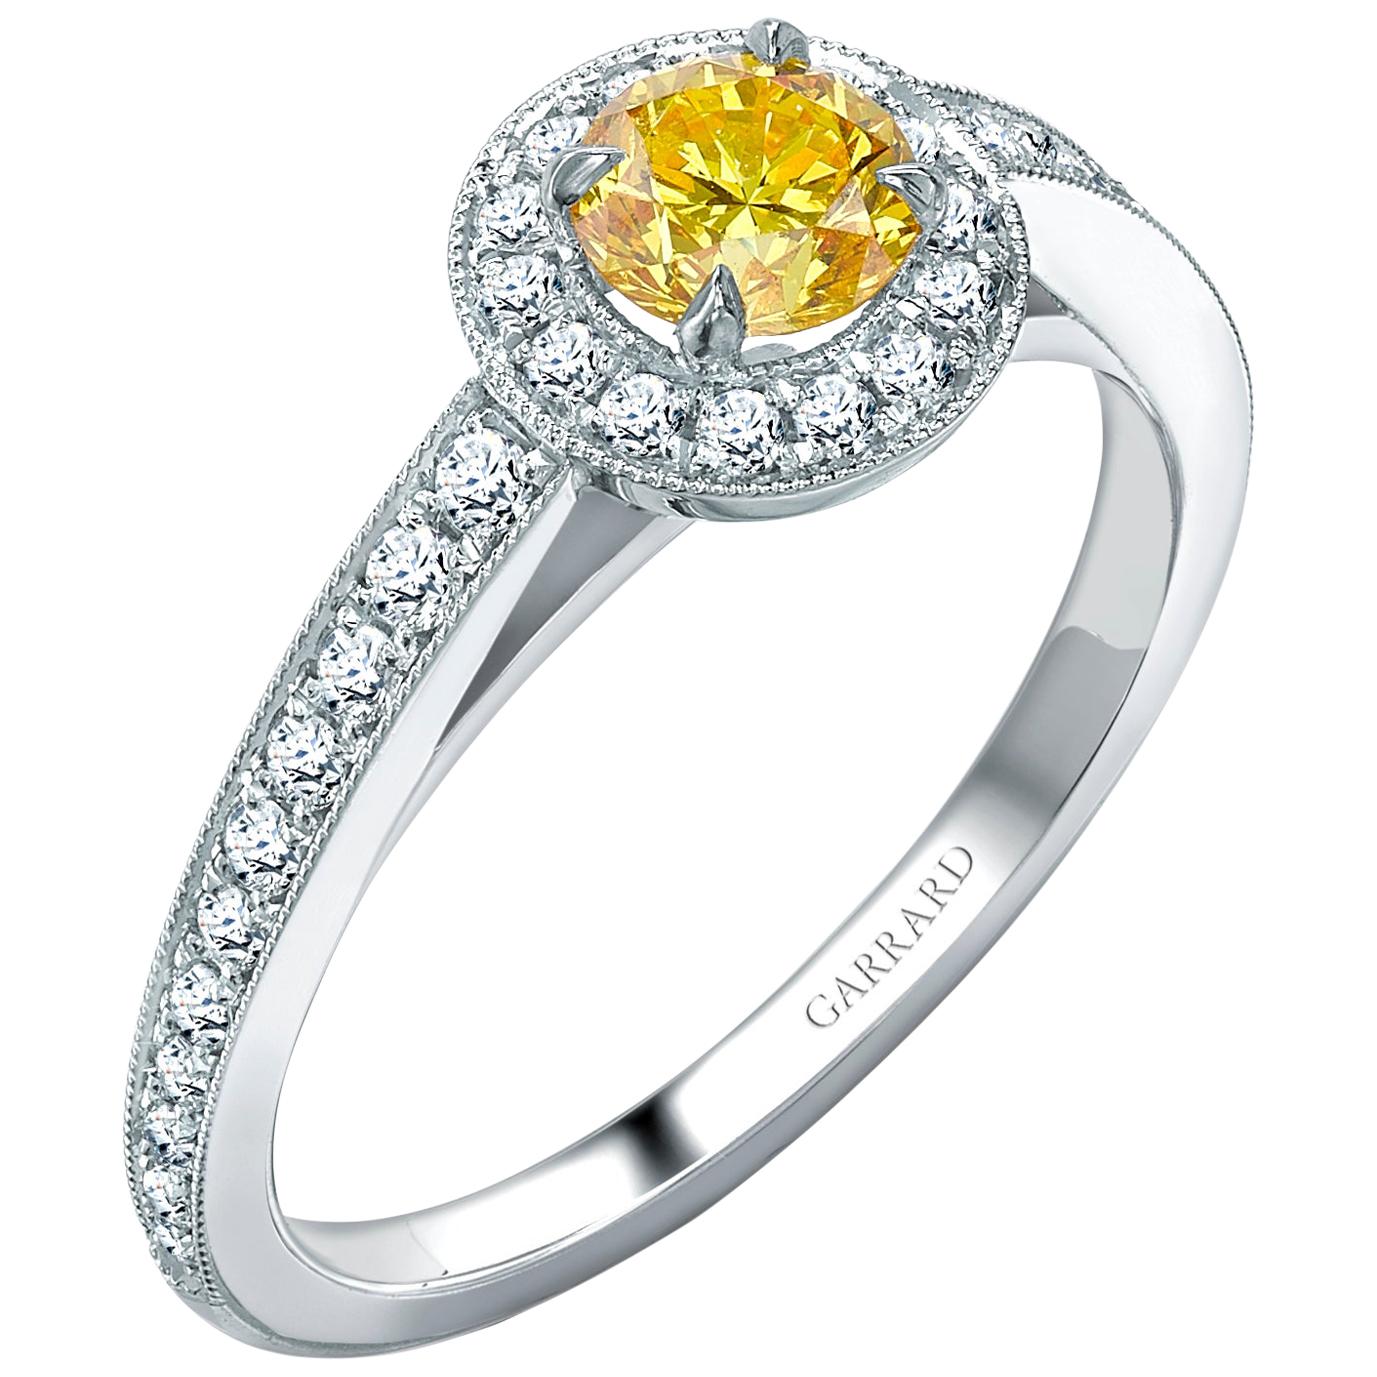 Garrard 'Evermore' Platinum GIA Certified Round Yellow and White Diamond Ring For Sale